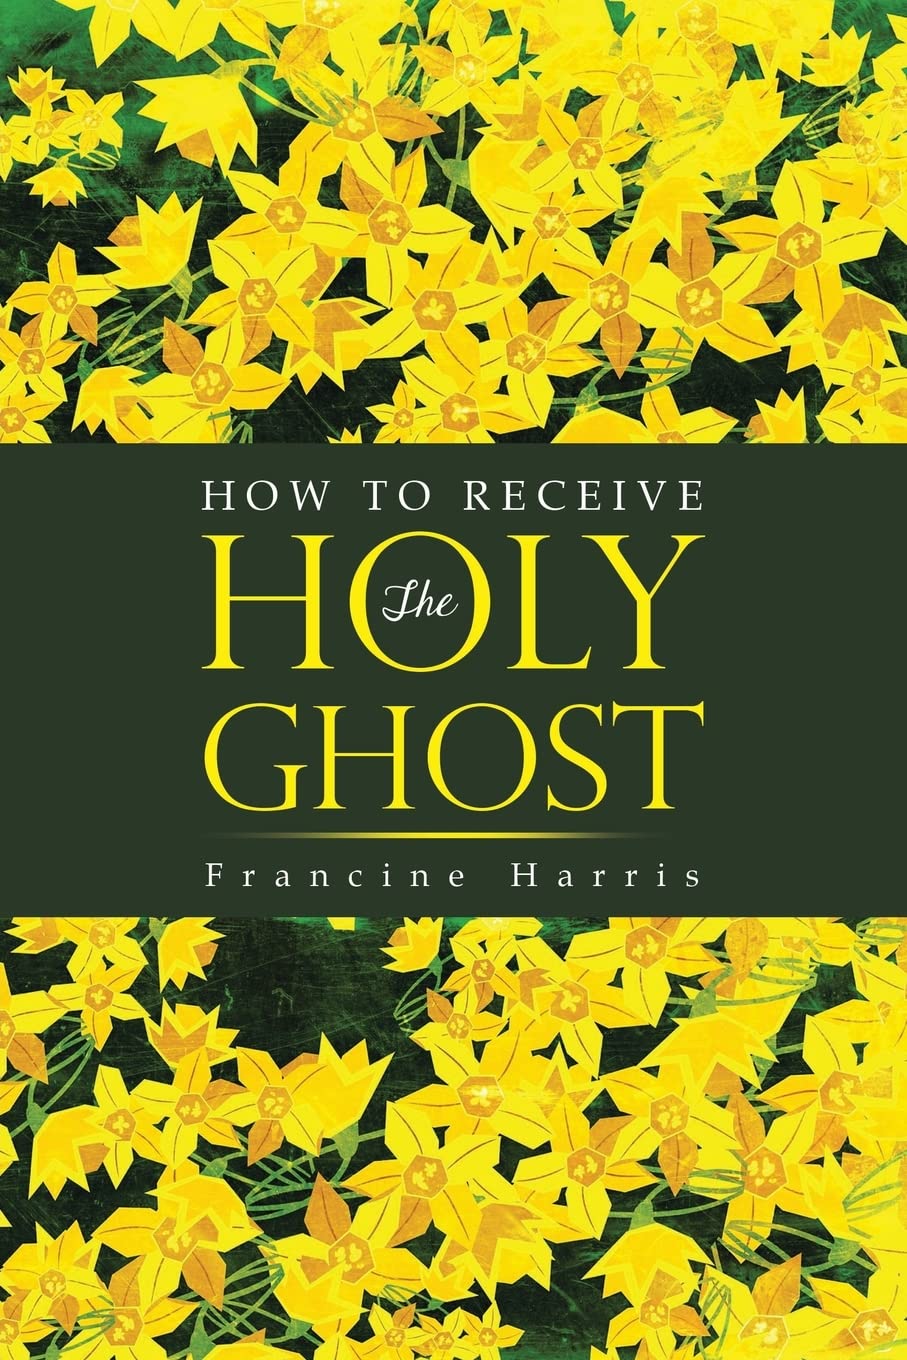 Francine Harris, Author's Tranquility Press Teach How to Receive the Holy Ghost With The Mosaic Law